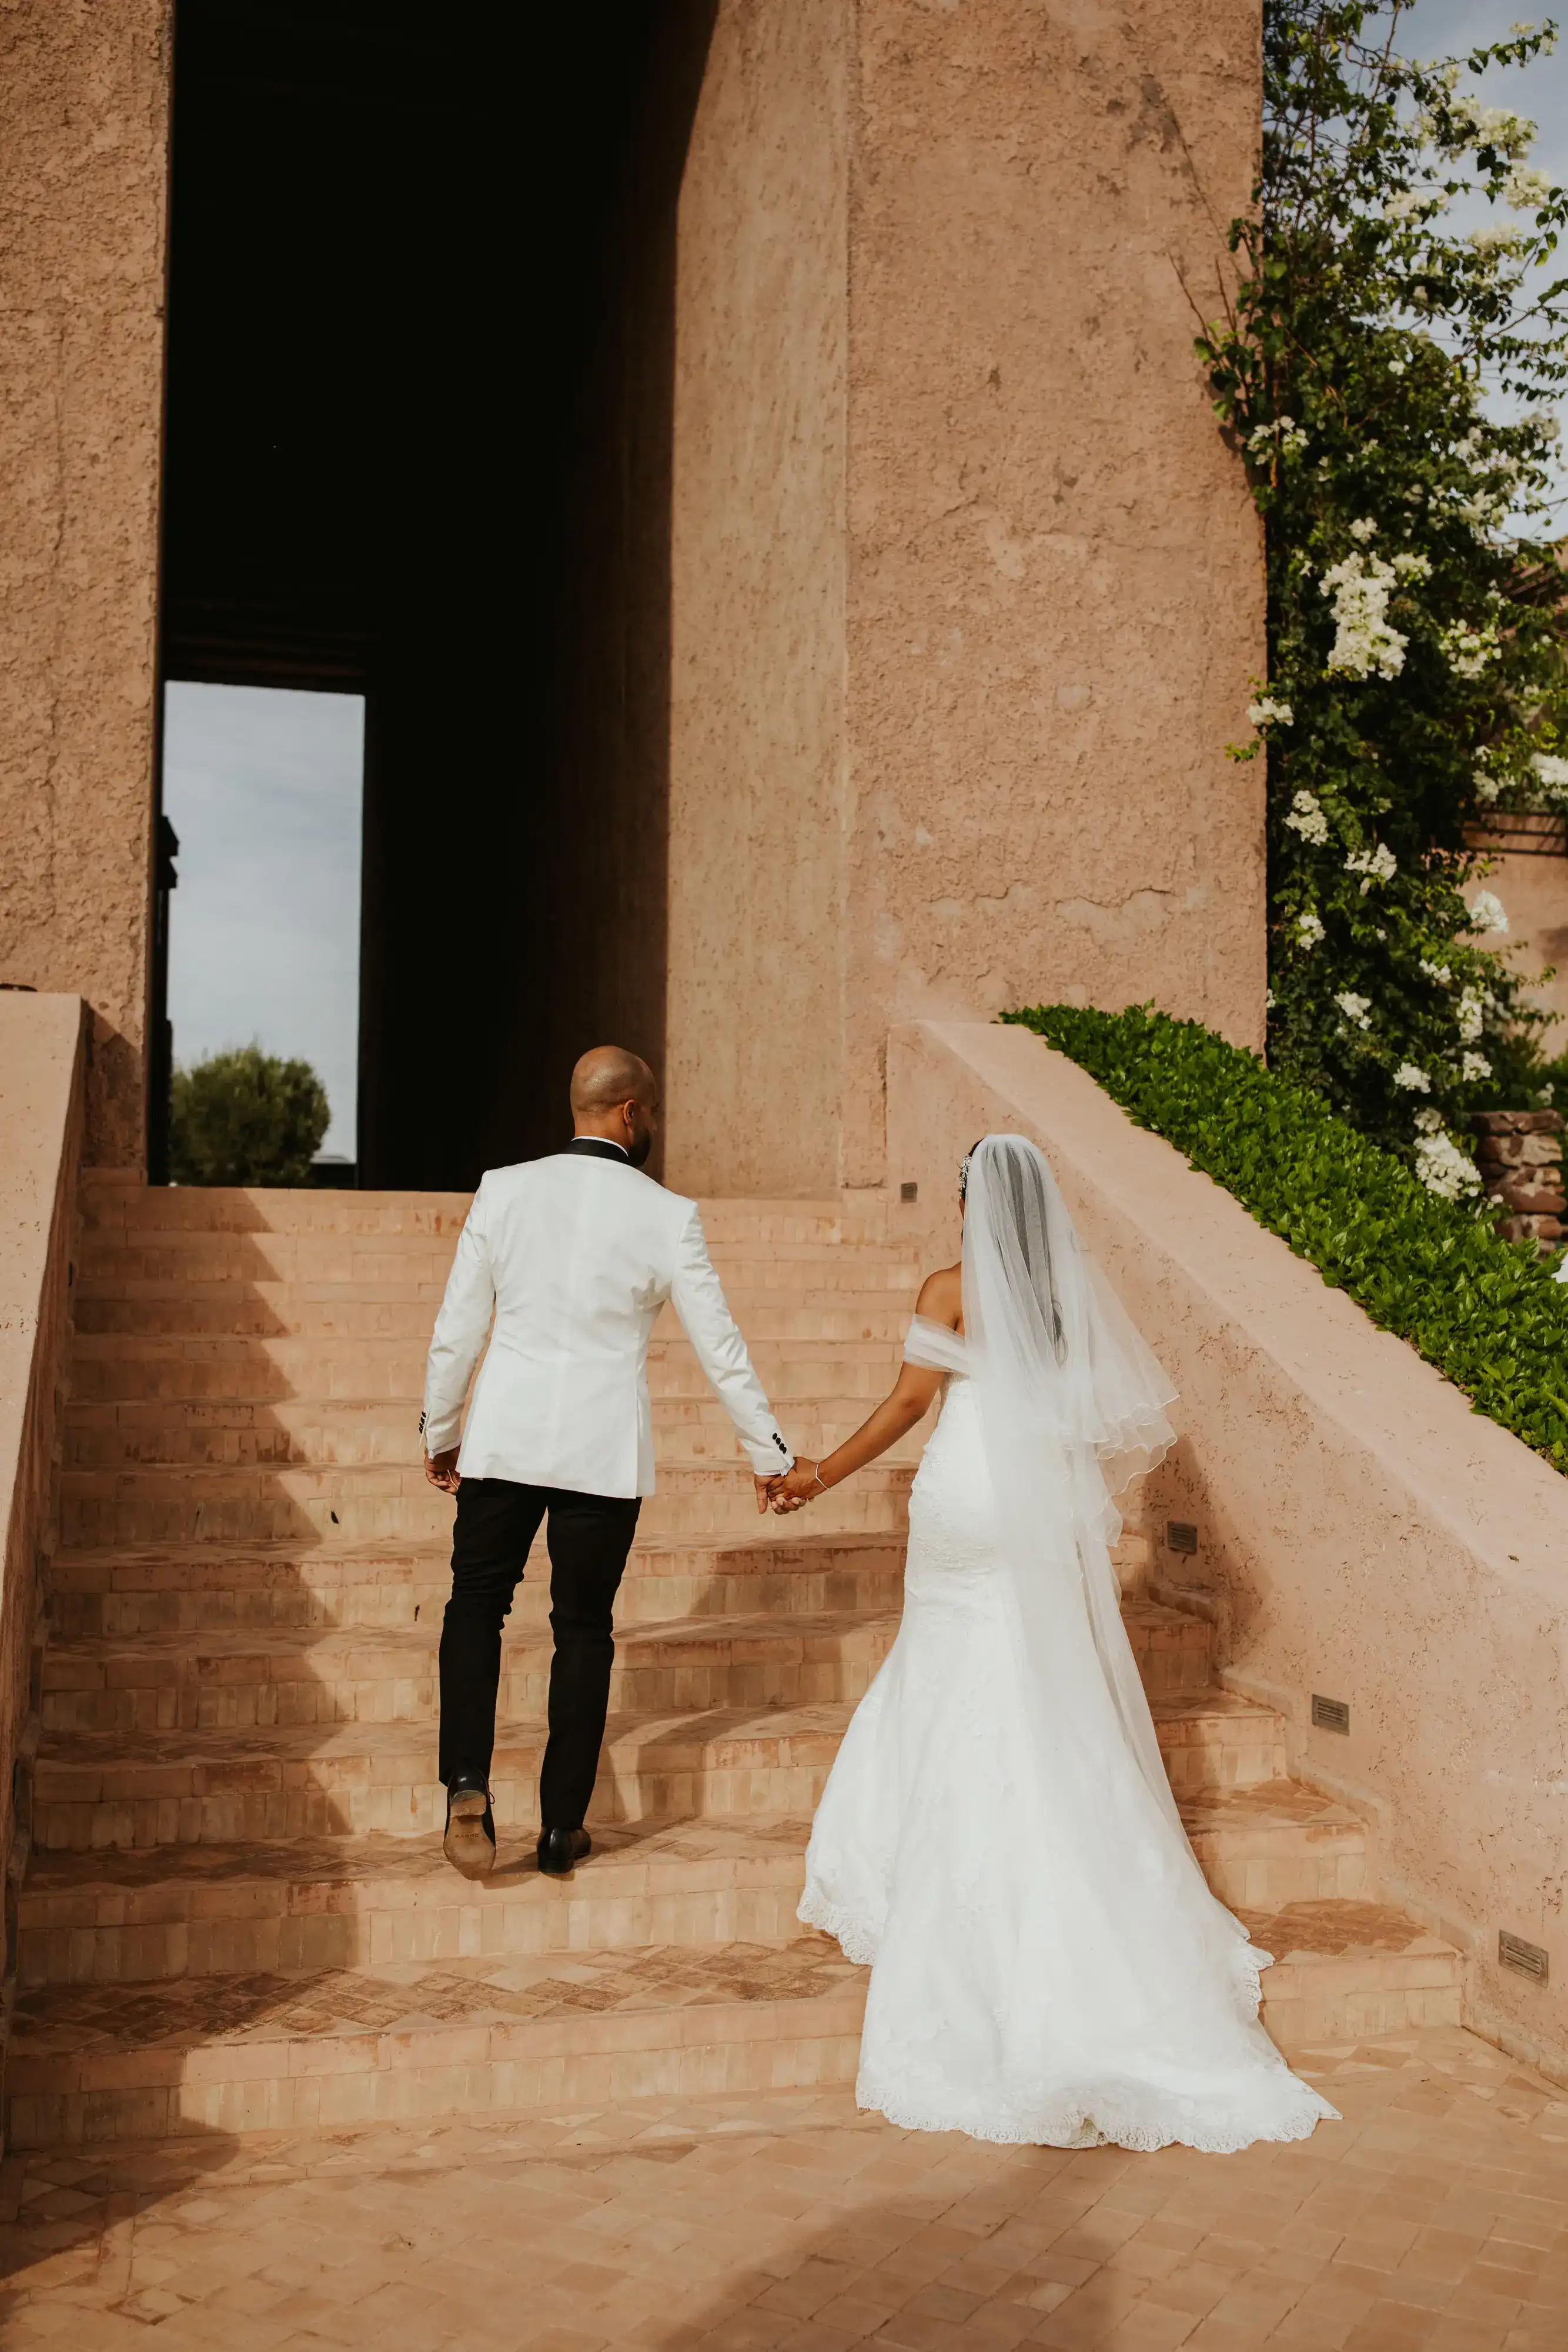 Couple holding hands in Marrakech venue